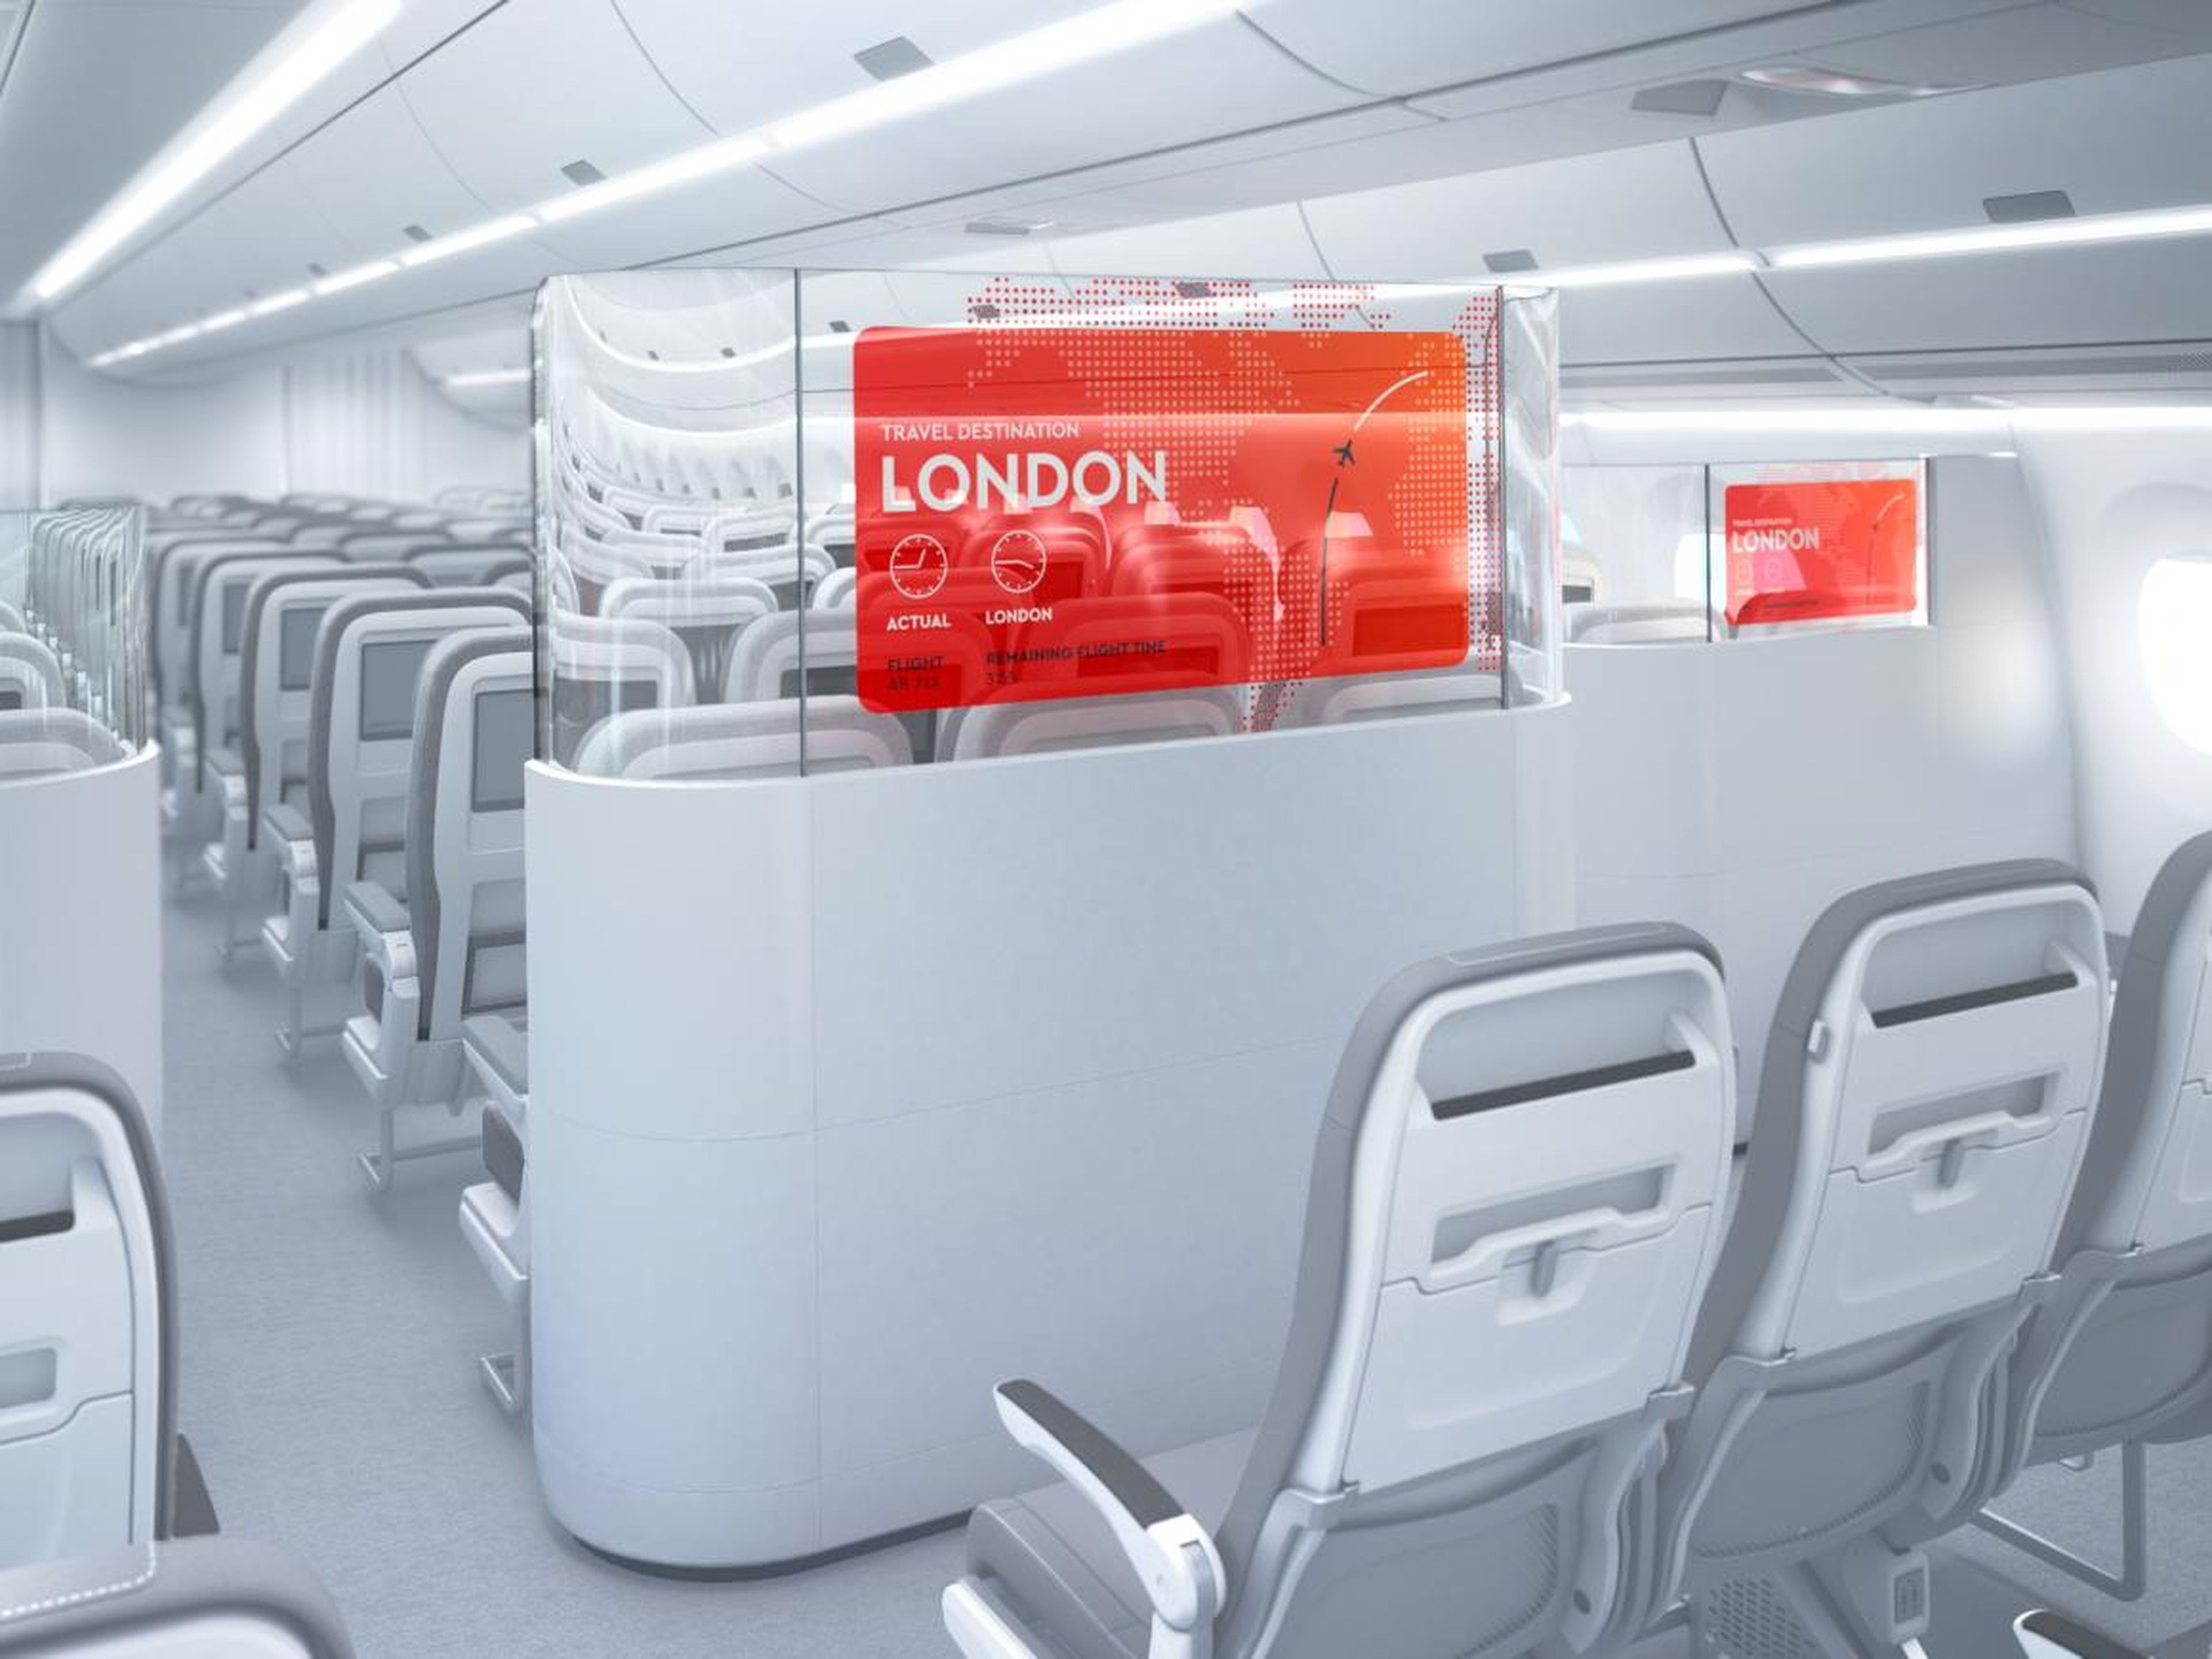 A fast-spreading trend in redesigning aircraft interiors is proving to be open concept cabins, with some airlines removing the barriers that separate cabins to give their aircraft a more open feel.